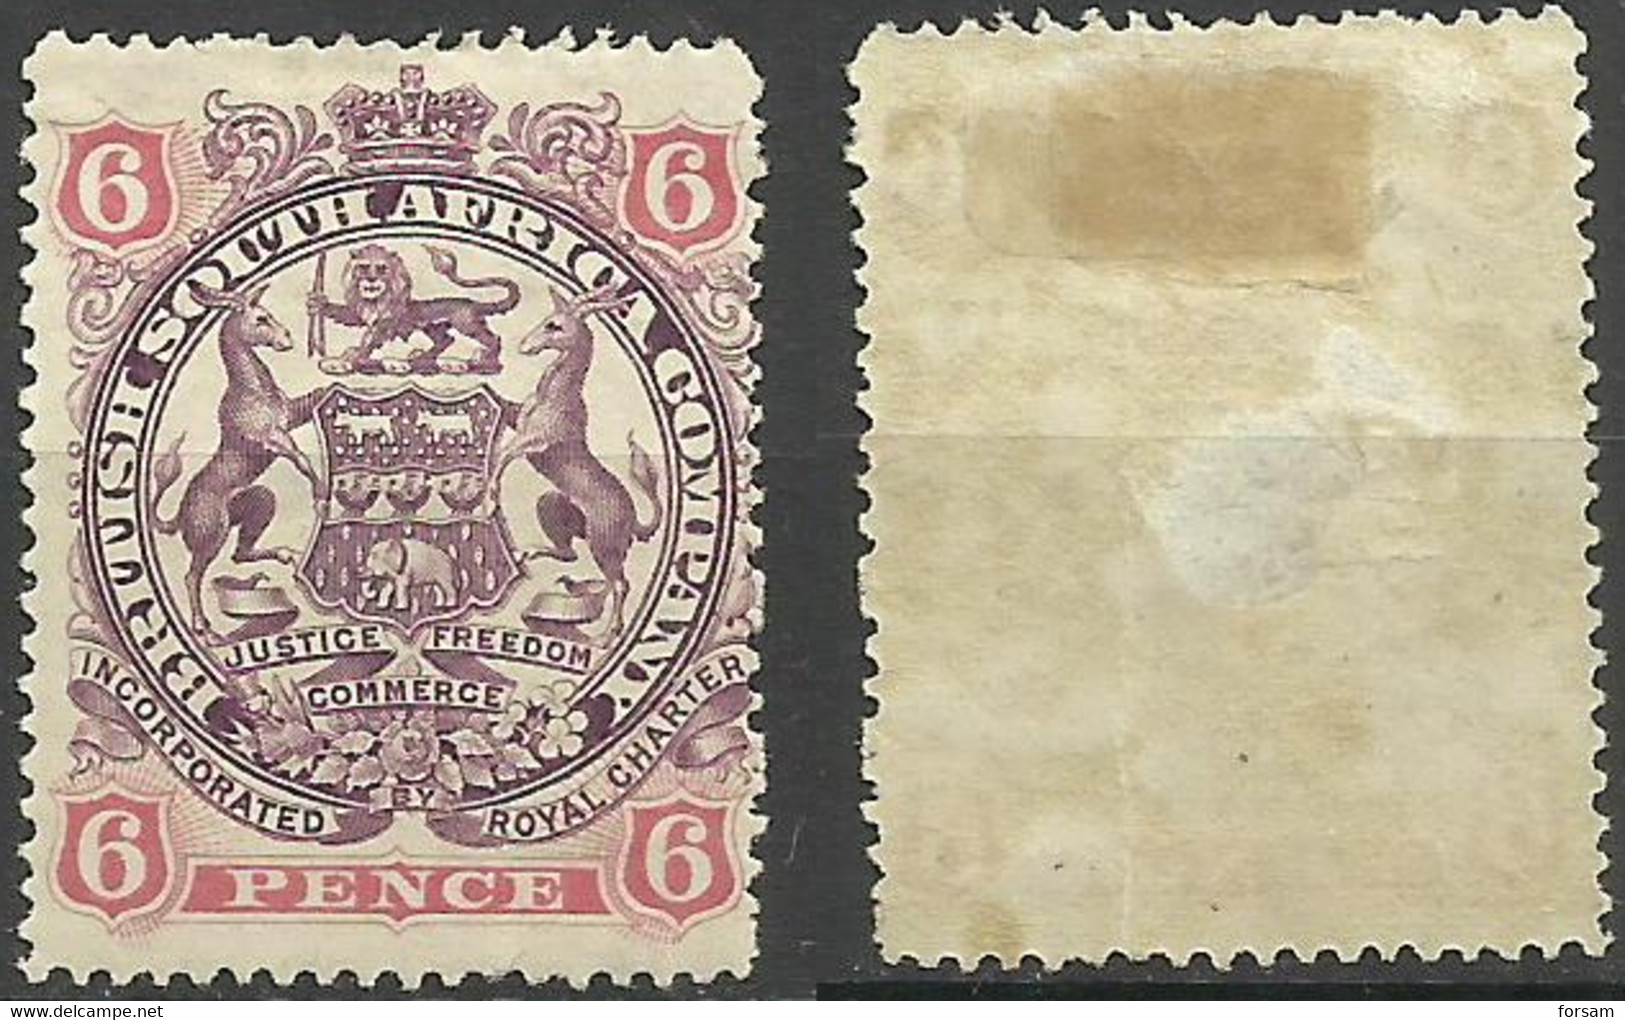 SOUTH AFRICA..1897..Michel # 54...MH...MiCV - 15 Euro. - Unclassified